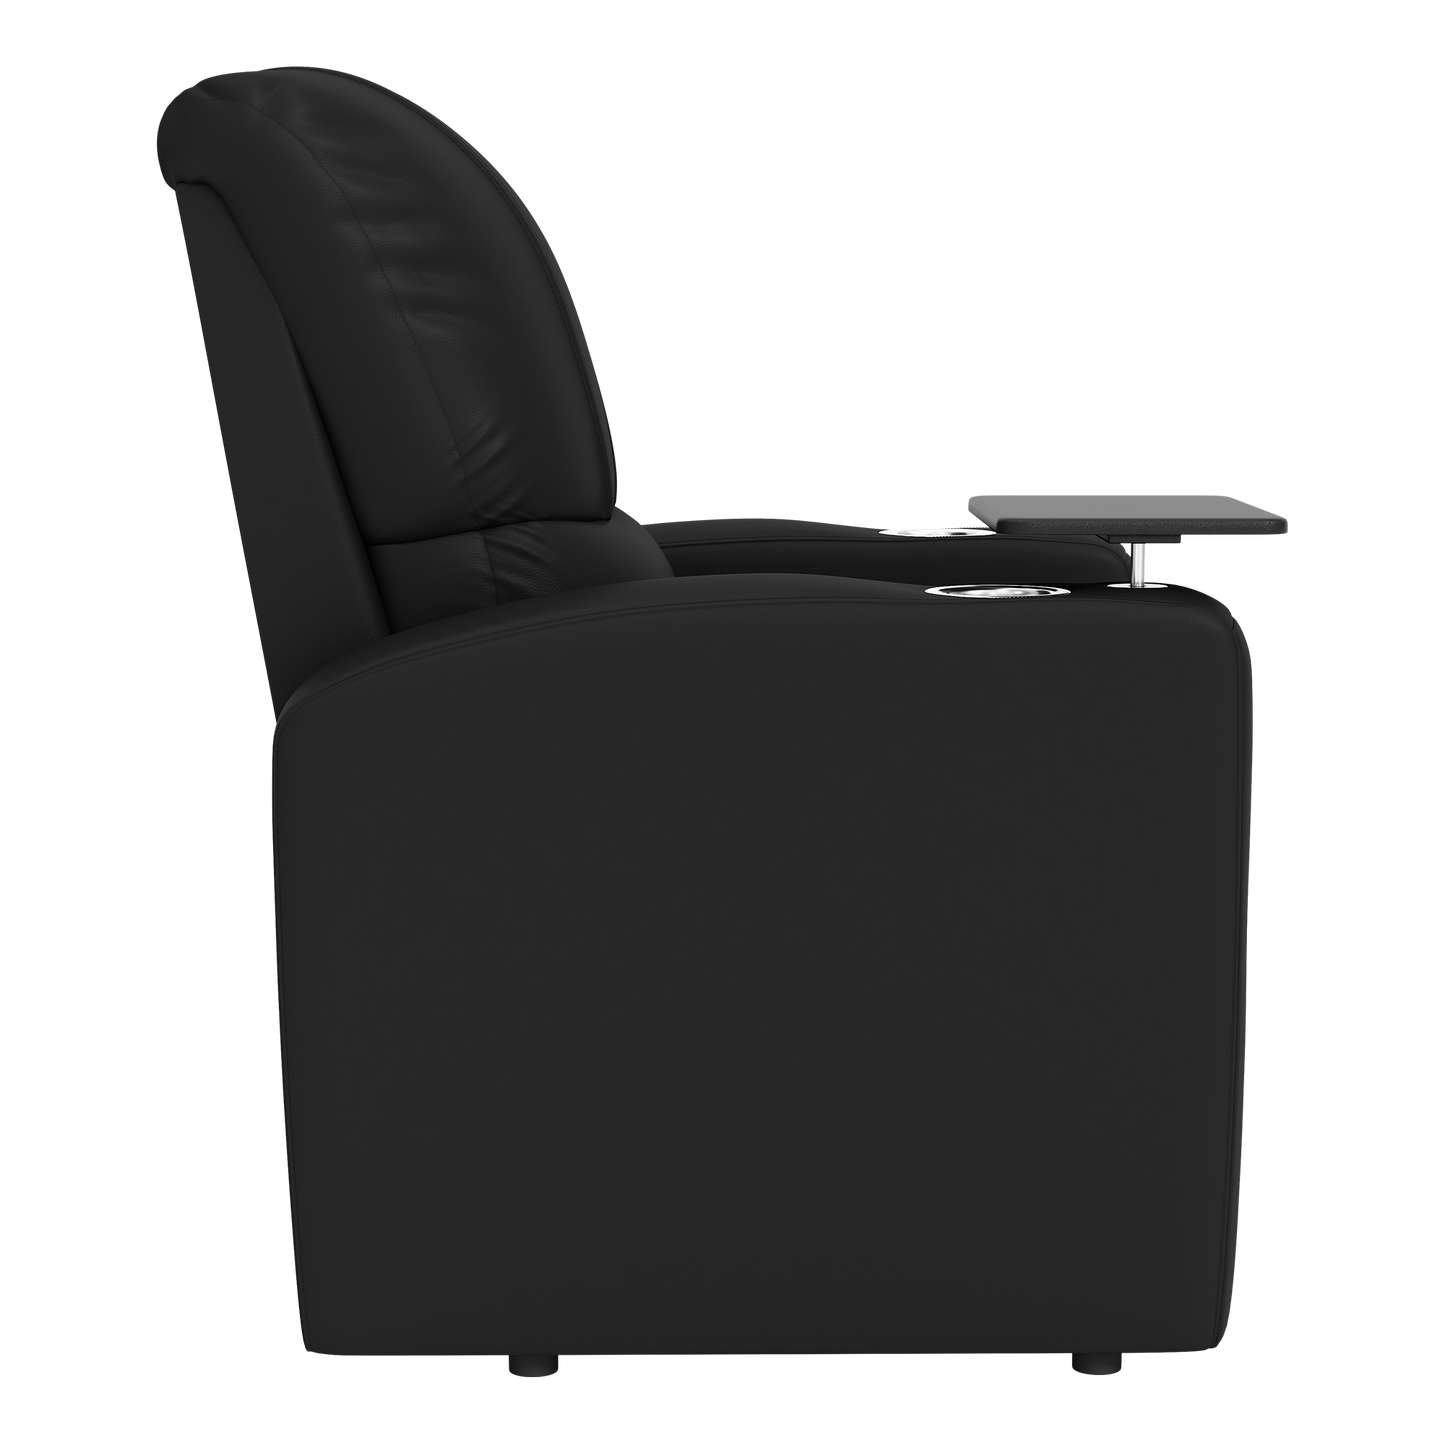 Stealth Power Plus Recliner with Pittsburgh Penguins Logo